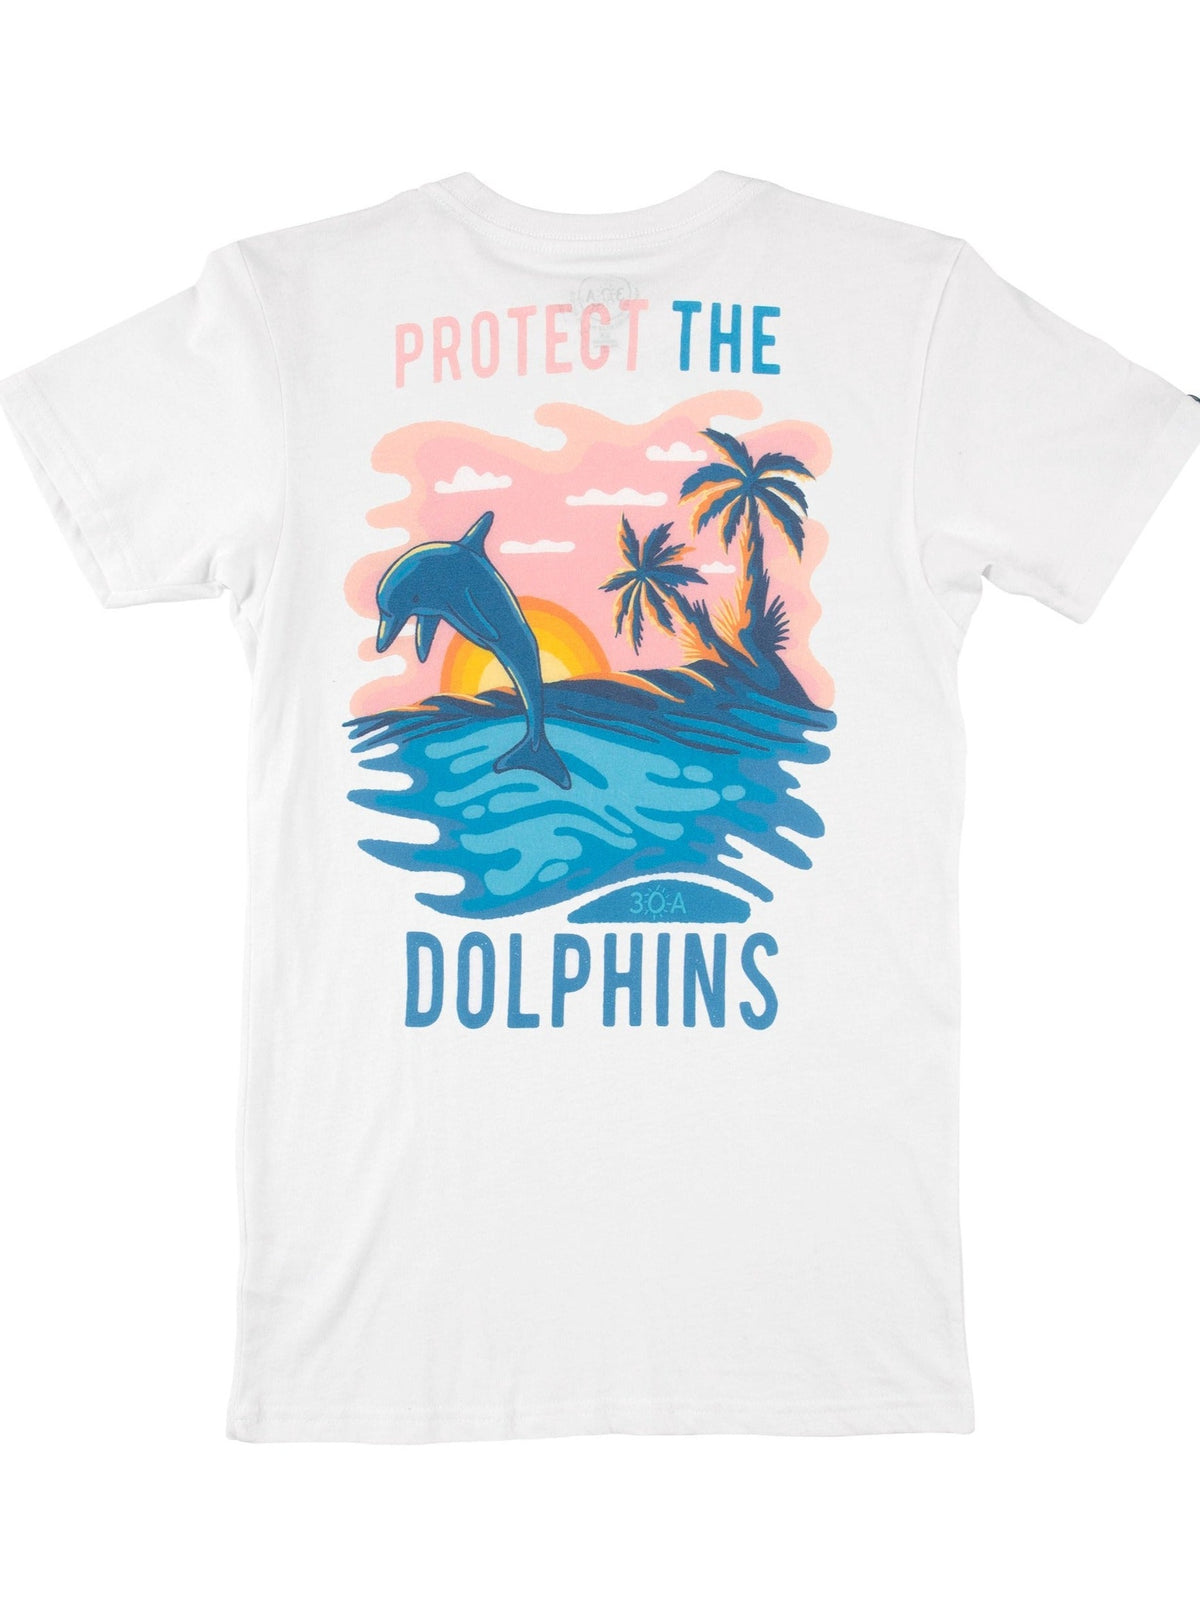 Protect The Dolphins T-Shirt